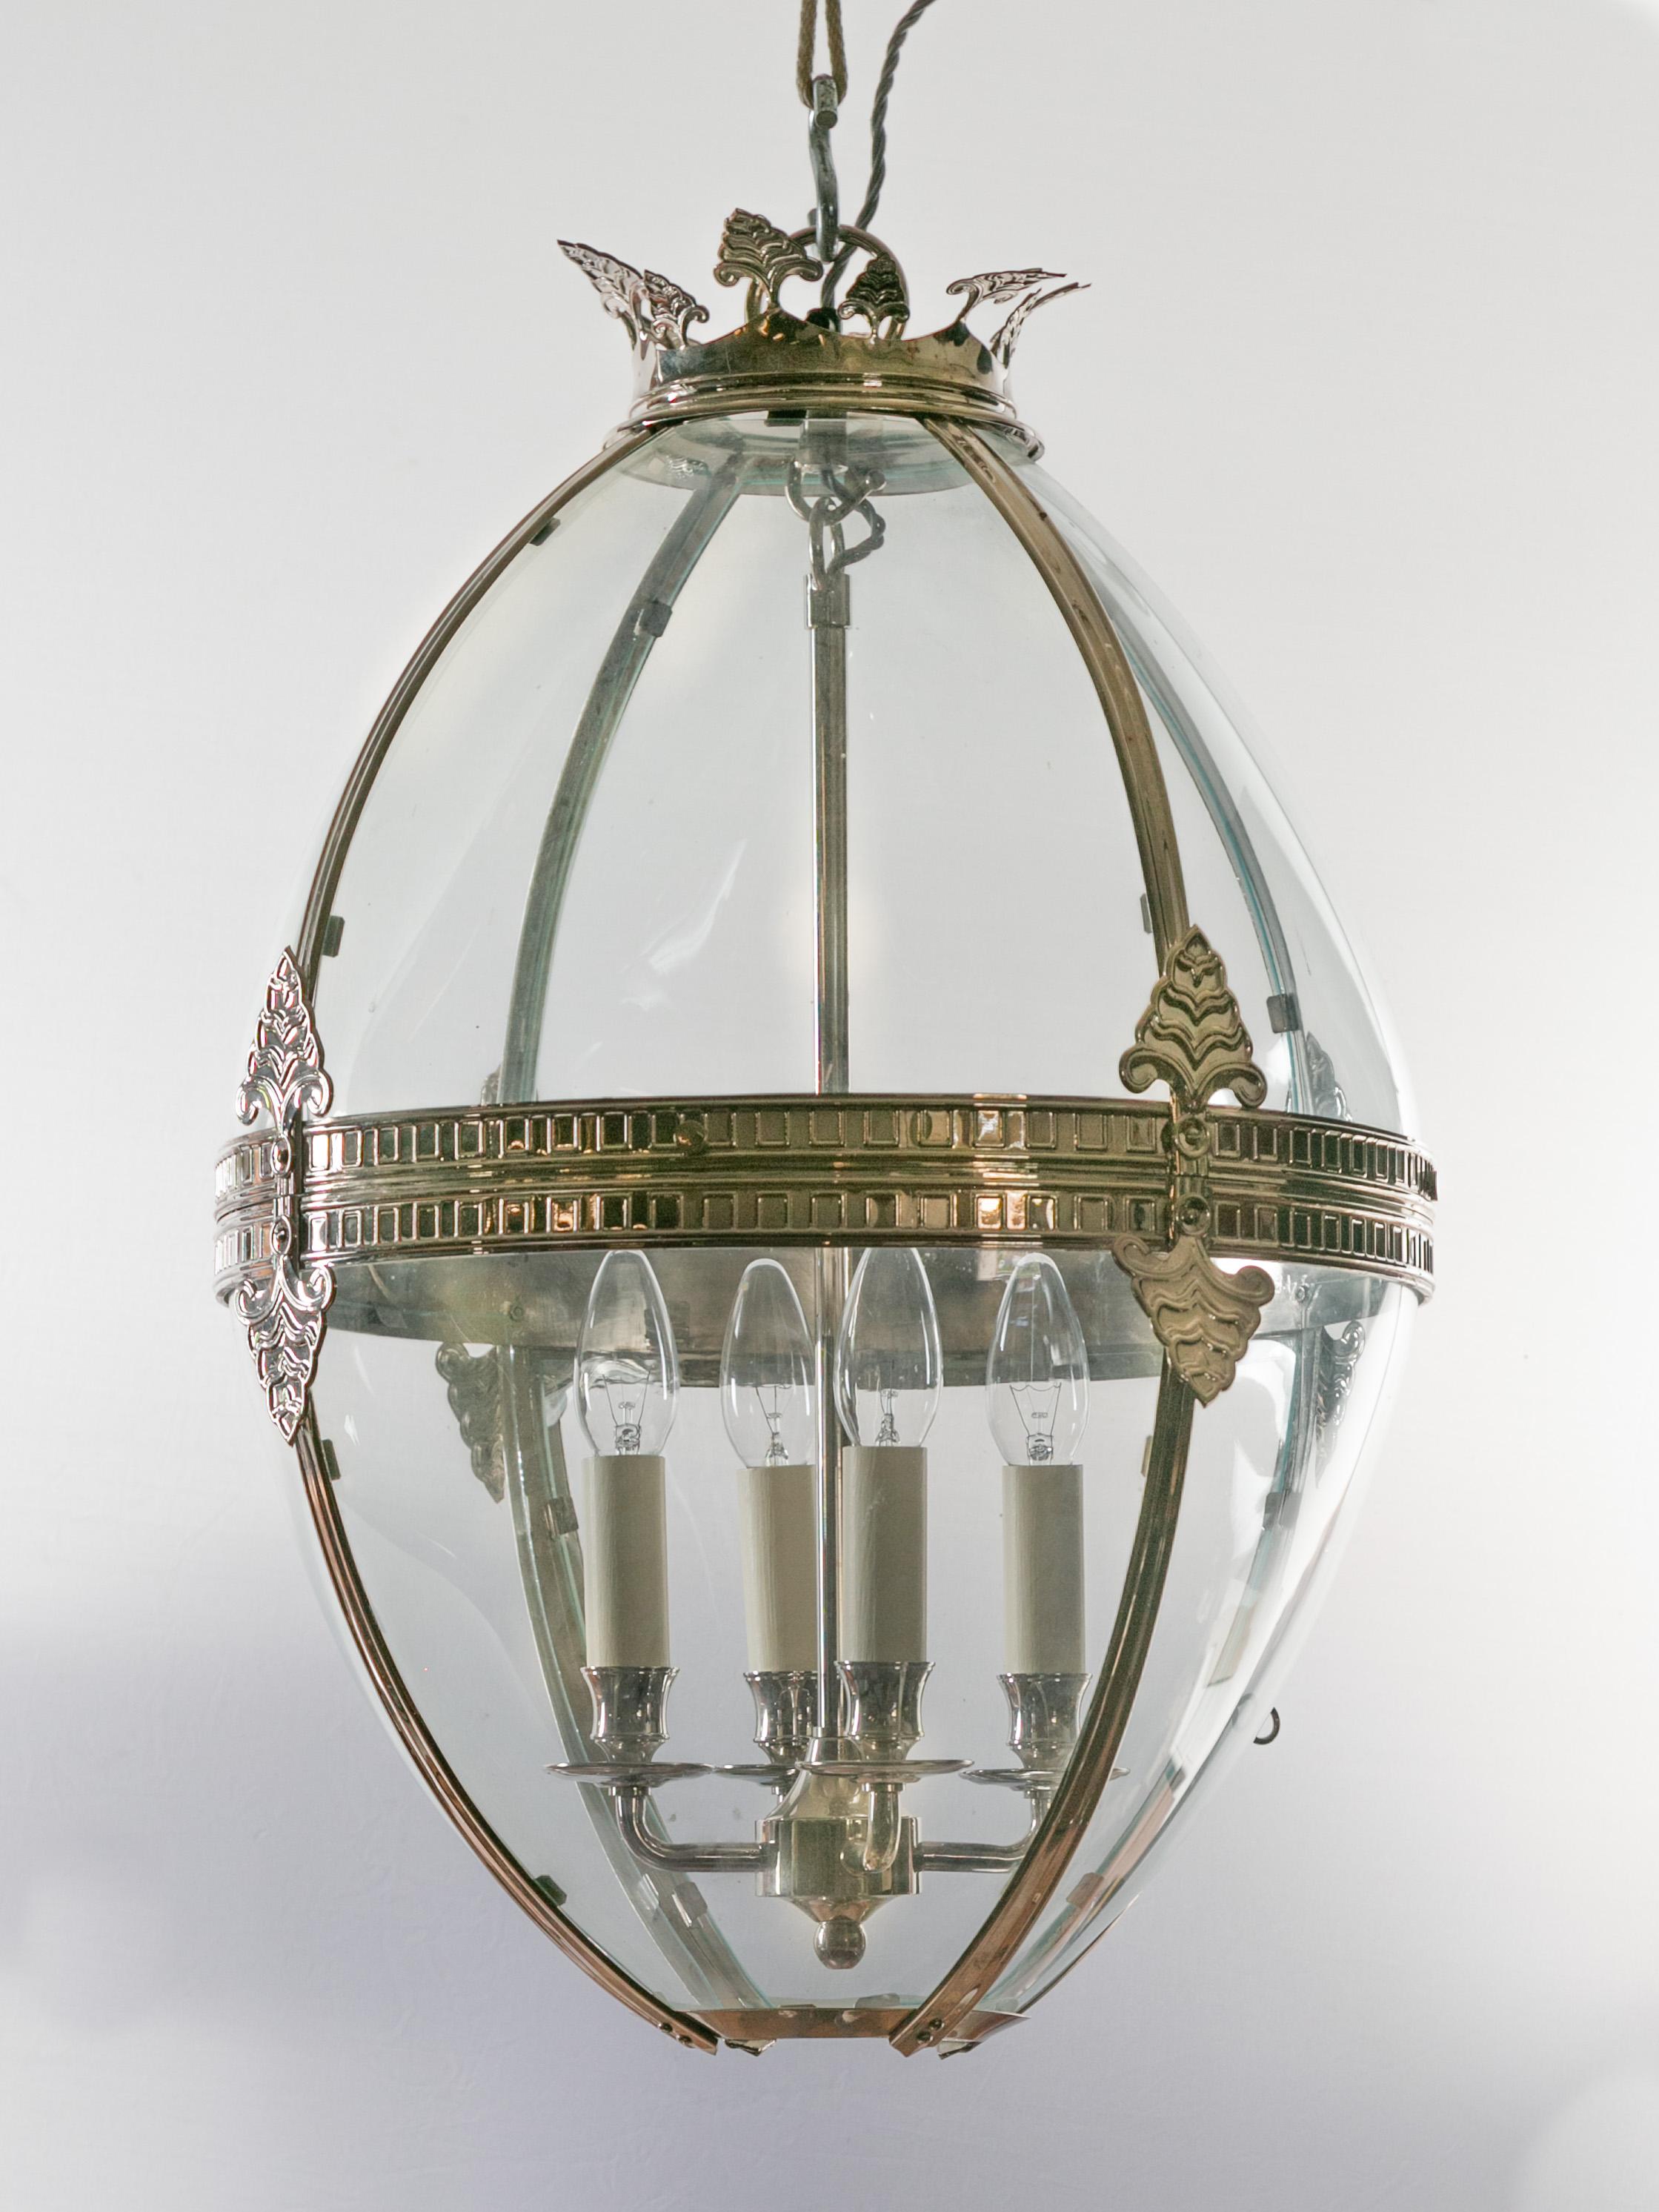 English Midcentury Nickel and Glass Four-Light Ovoid Lantern with Palmettes In Good Condition For Sale In Atlanta, GA